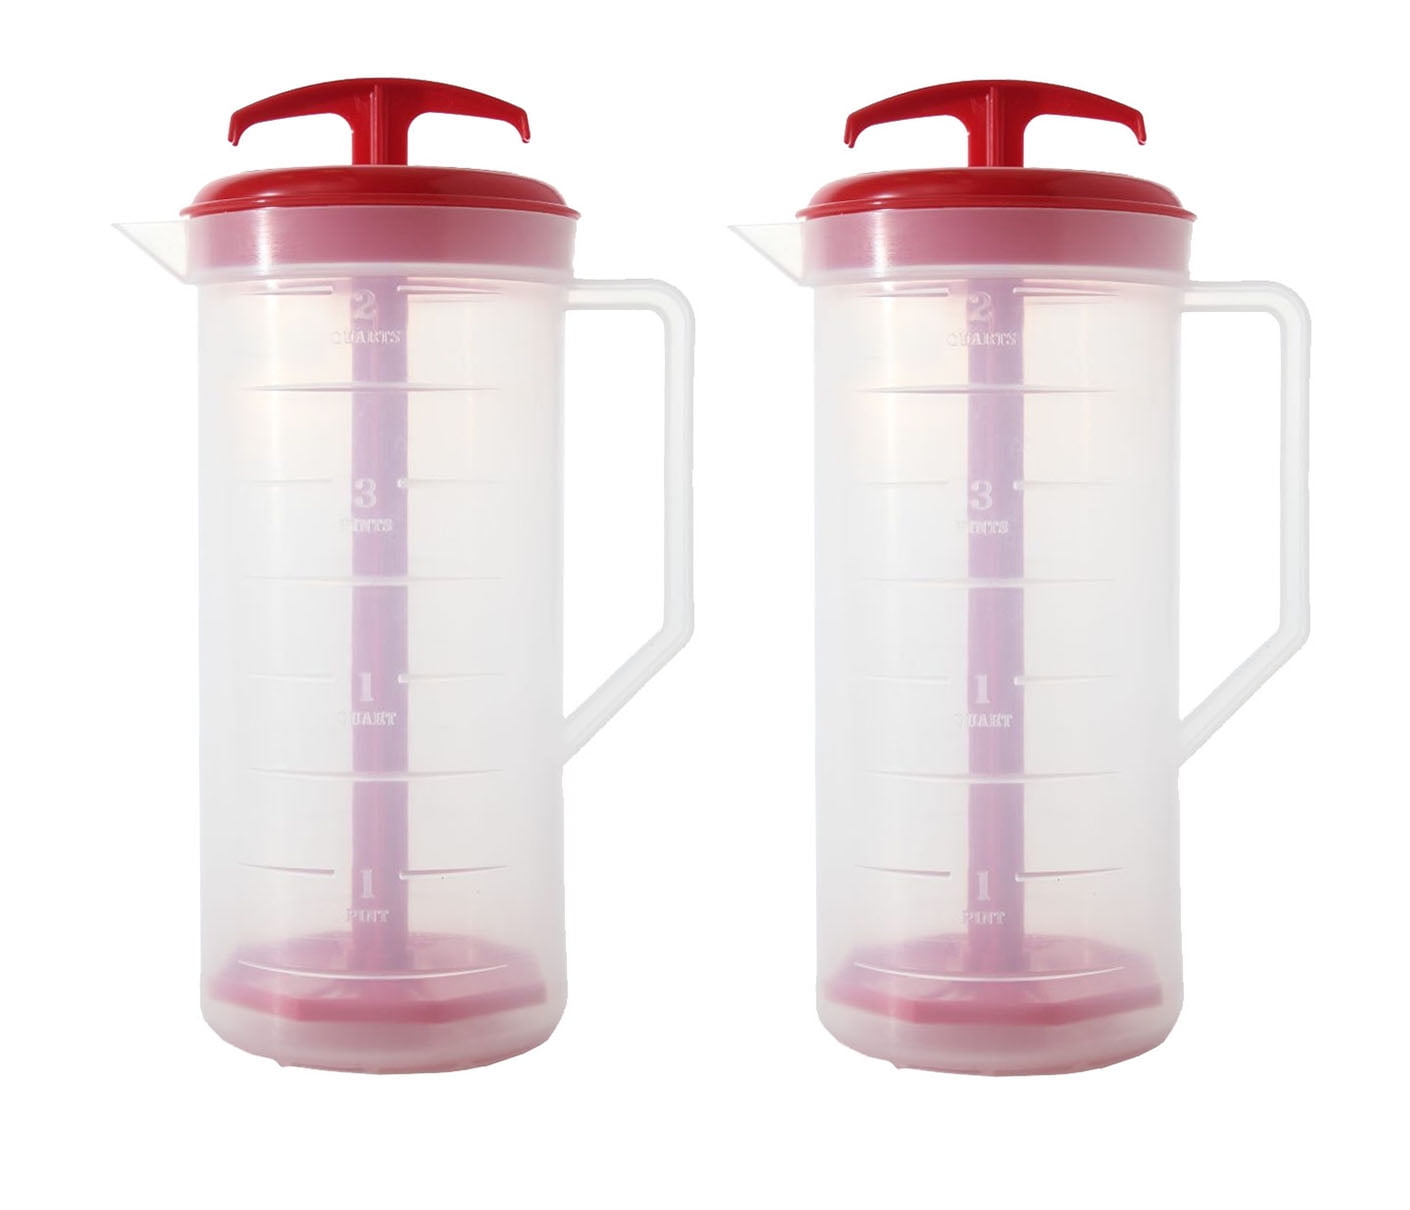 Leading Ware 2.5 Quarts Water Pitcher with Lid, Swirl Unbreakable Plastic  Pitcher, Drink Pitcher, Juice Pitcher with Spout BPA Free